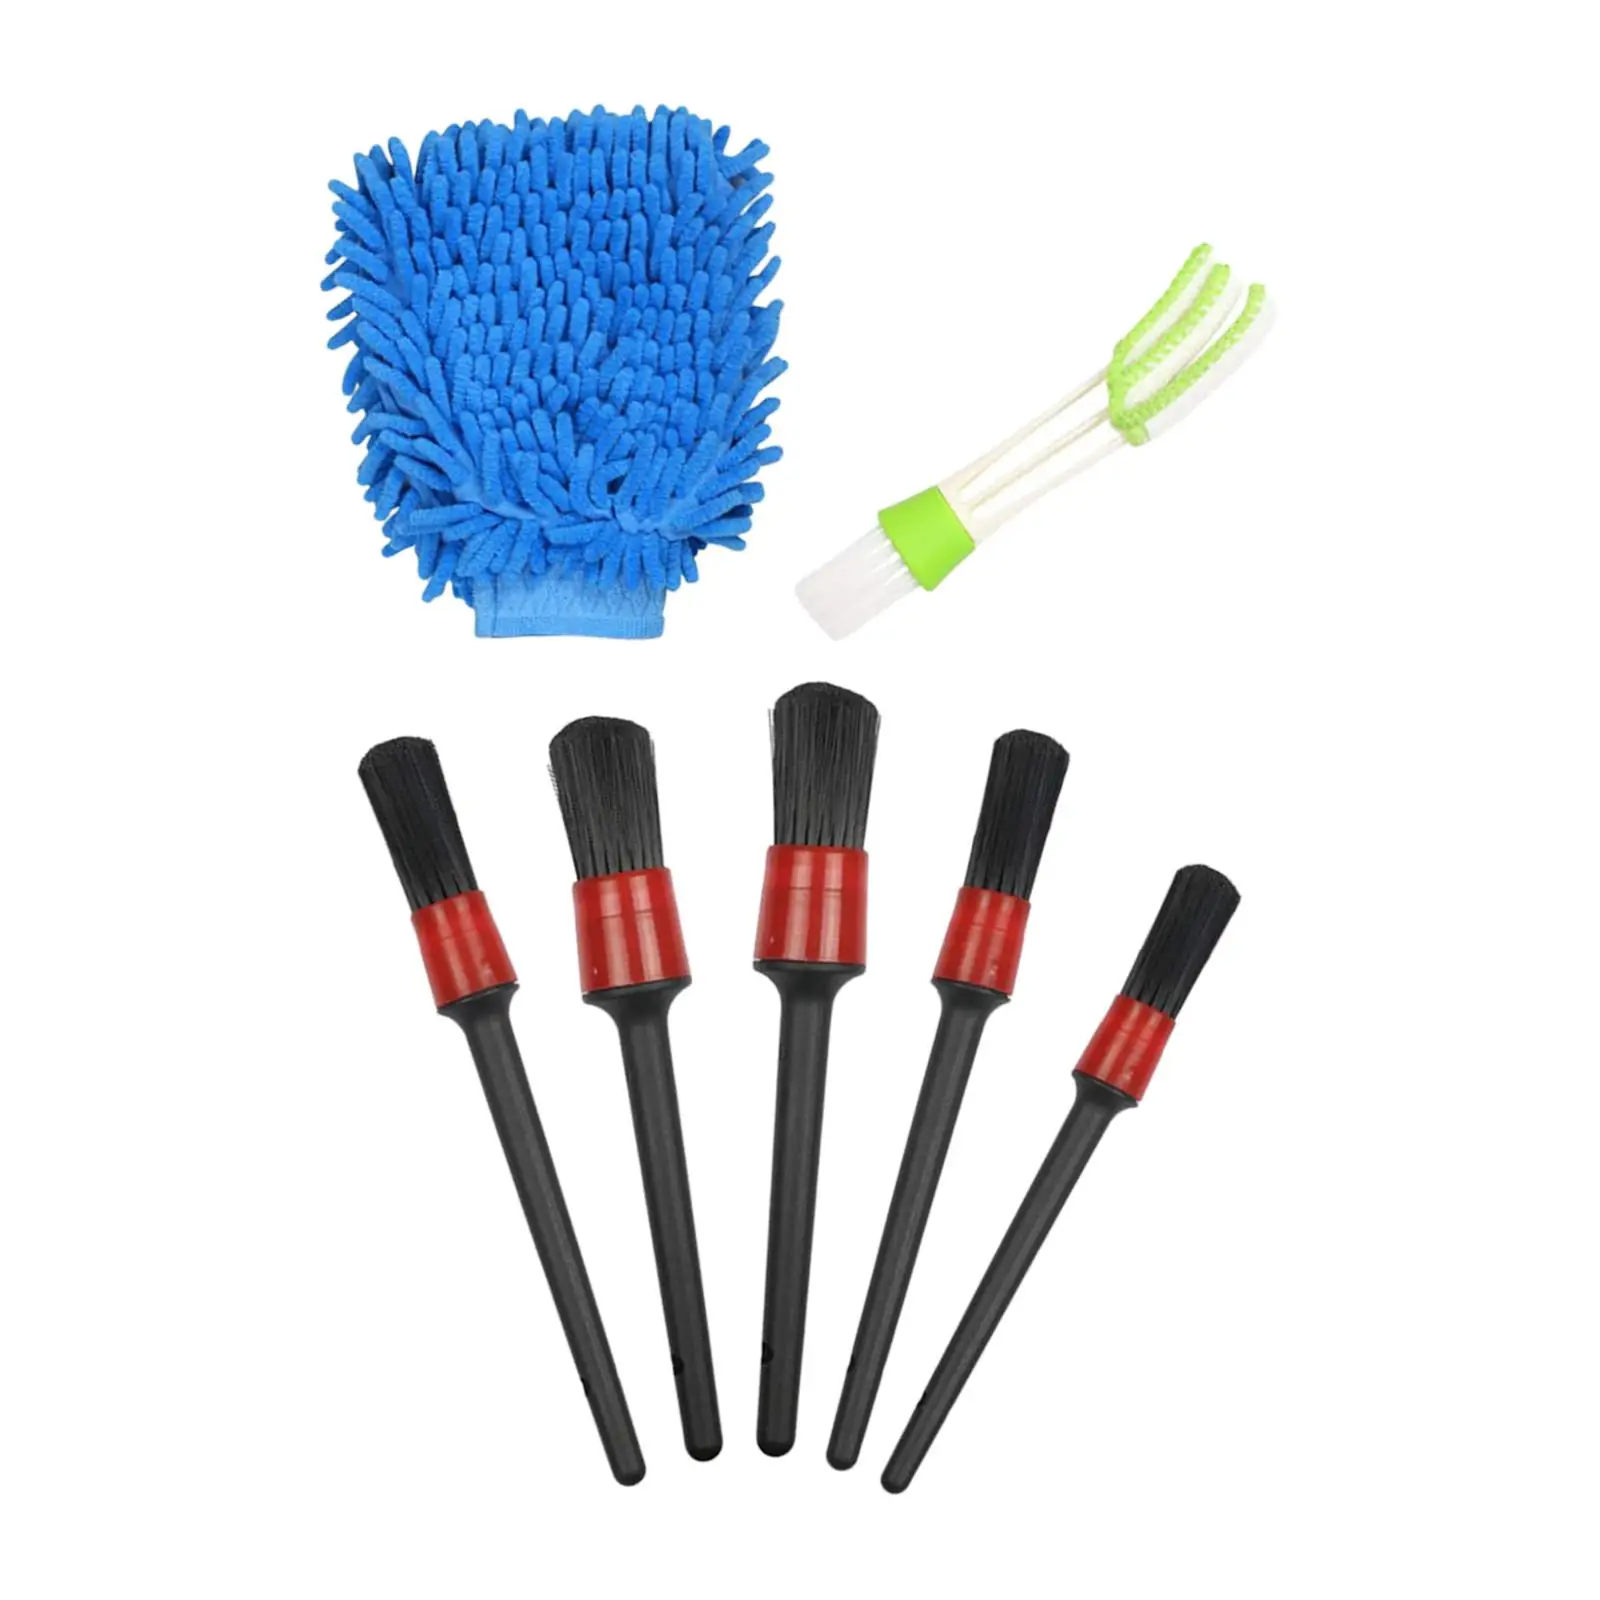 

7 pieces Car Detailing Brush Cleaner Glove Set for Trucks, Motorcycles, Bicycles, Rvs, Boats Universal cleaning Tools Kit